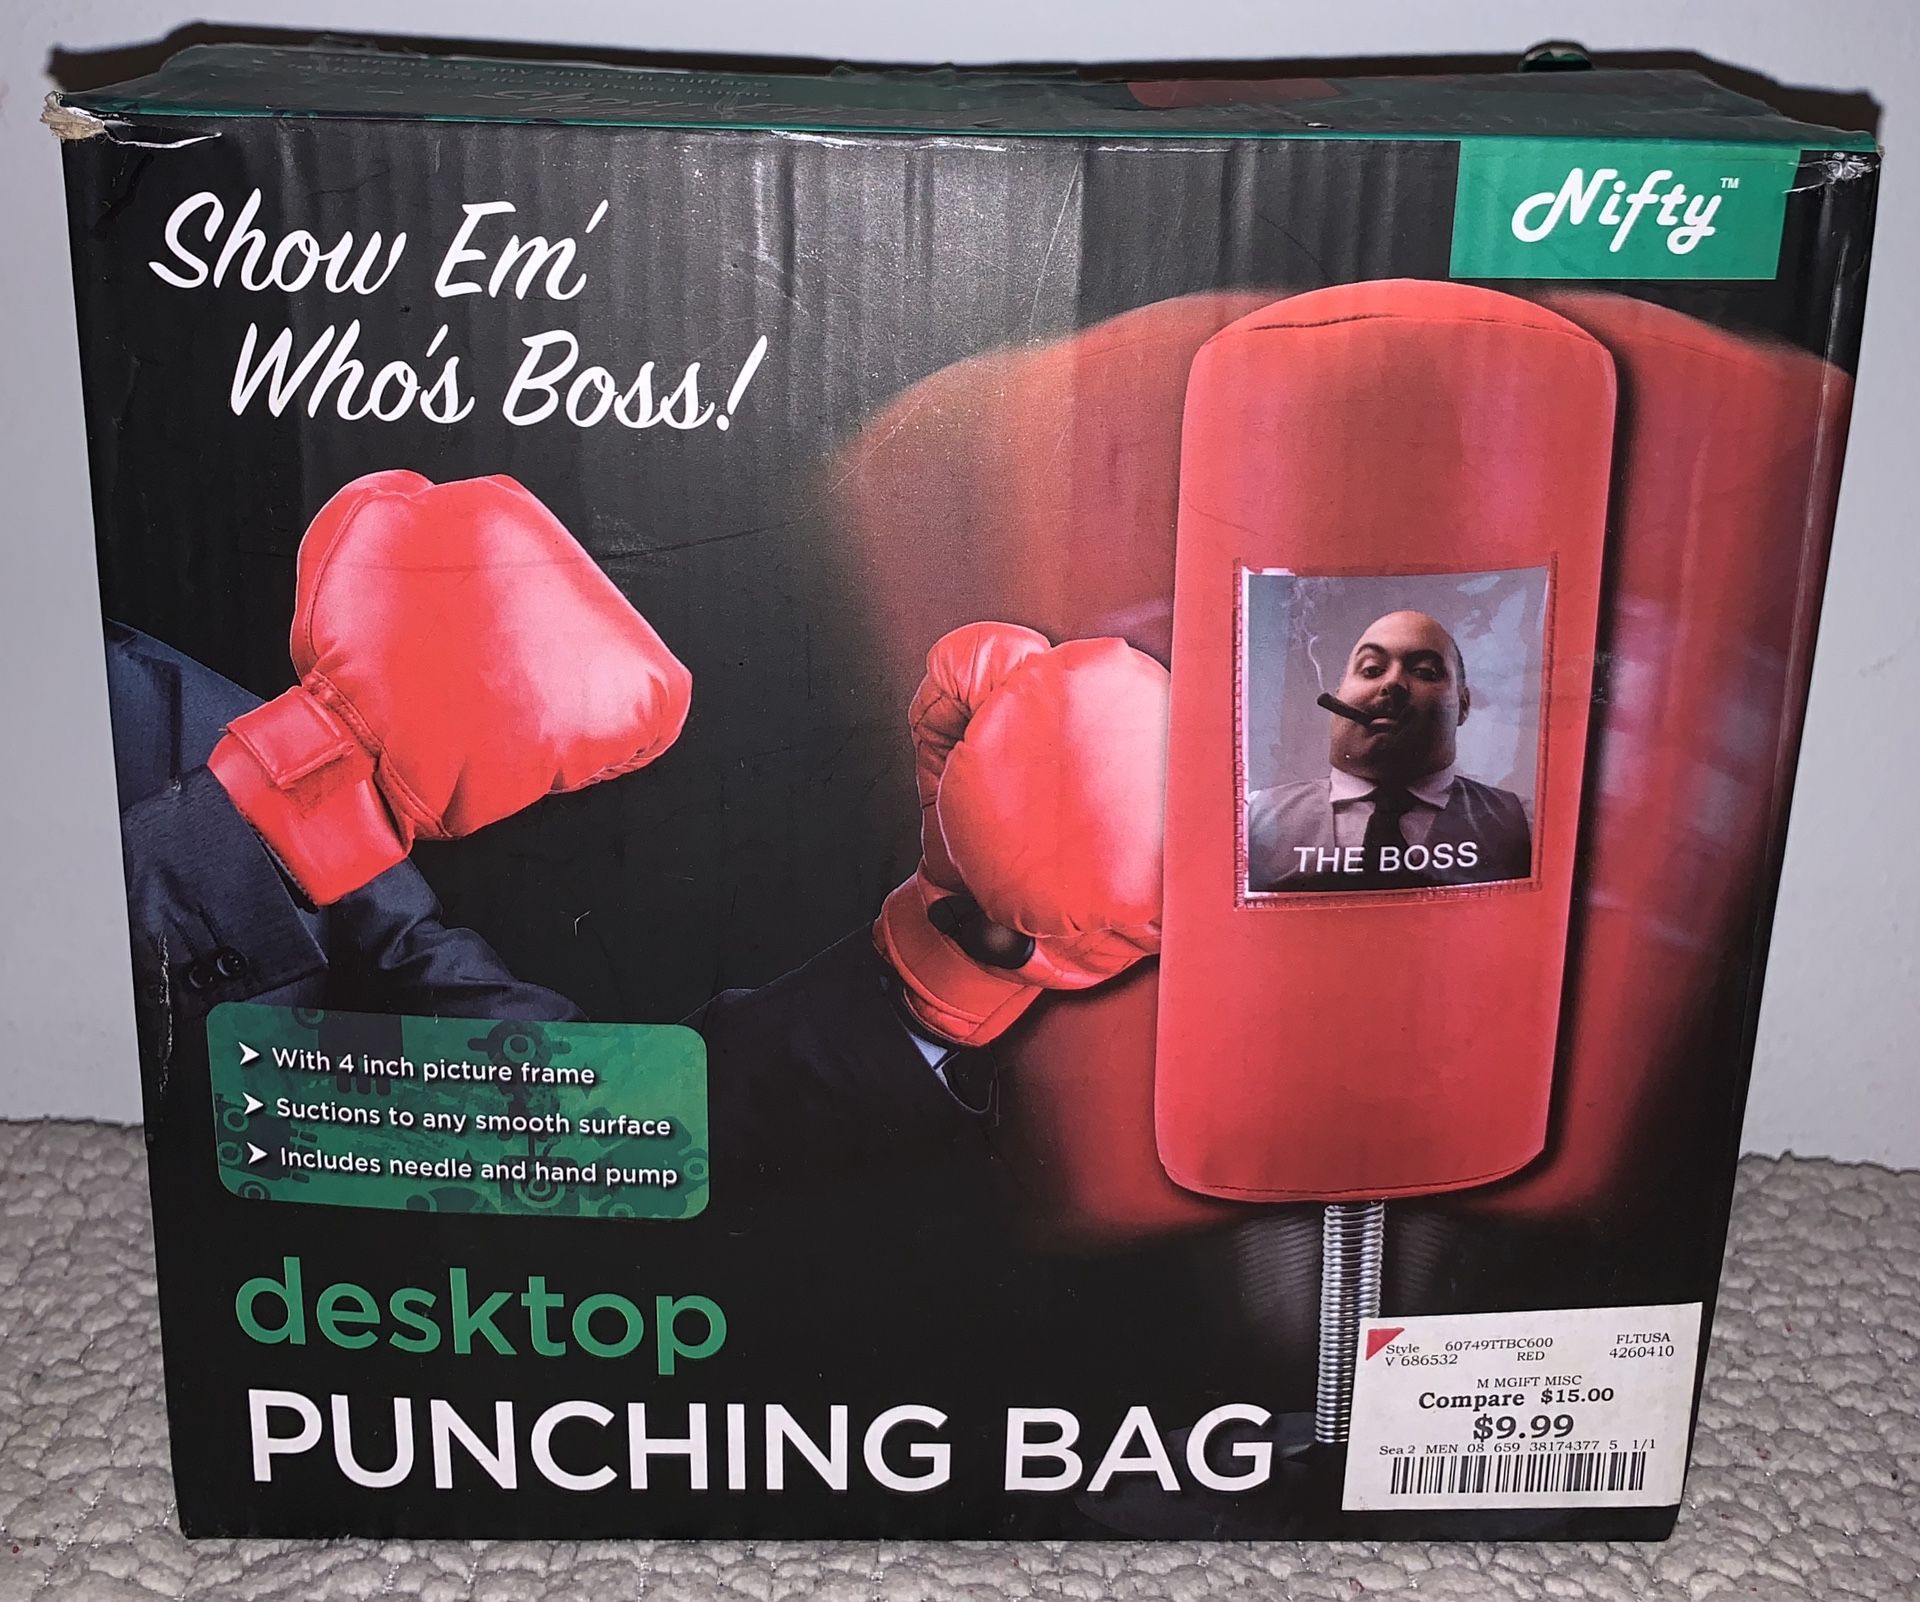 Punching bag(I have hundreds of items check everything here